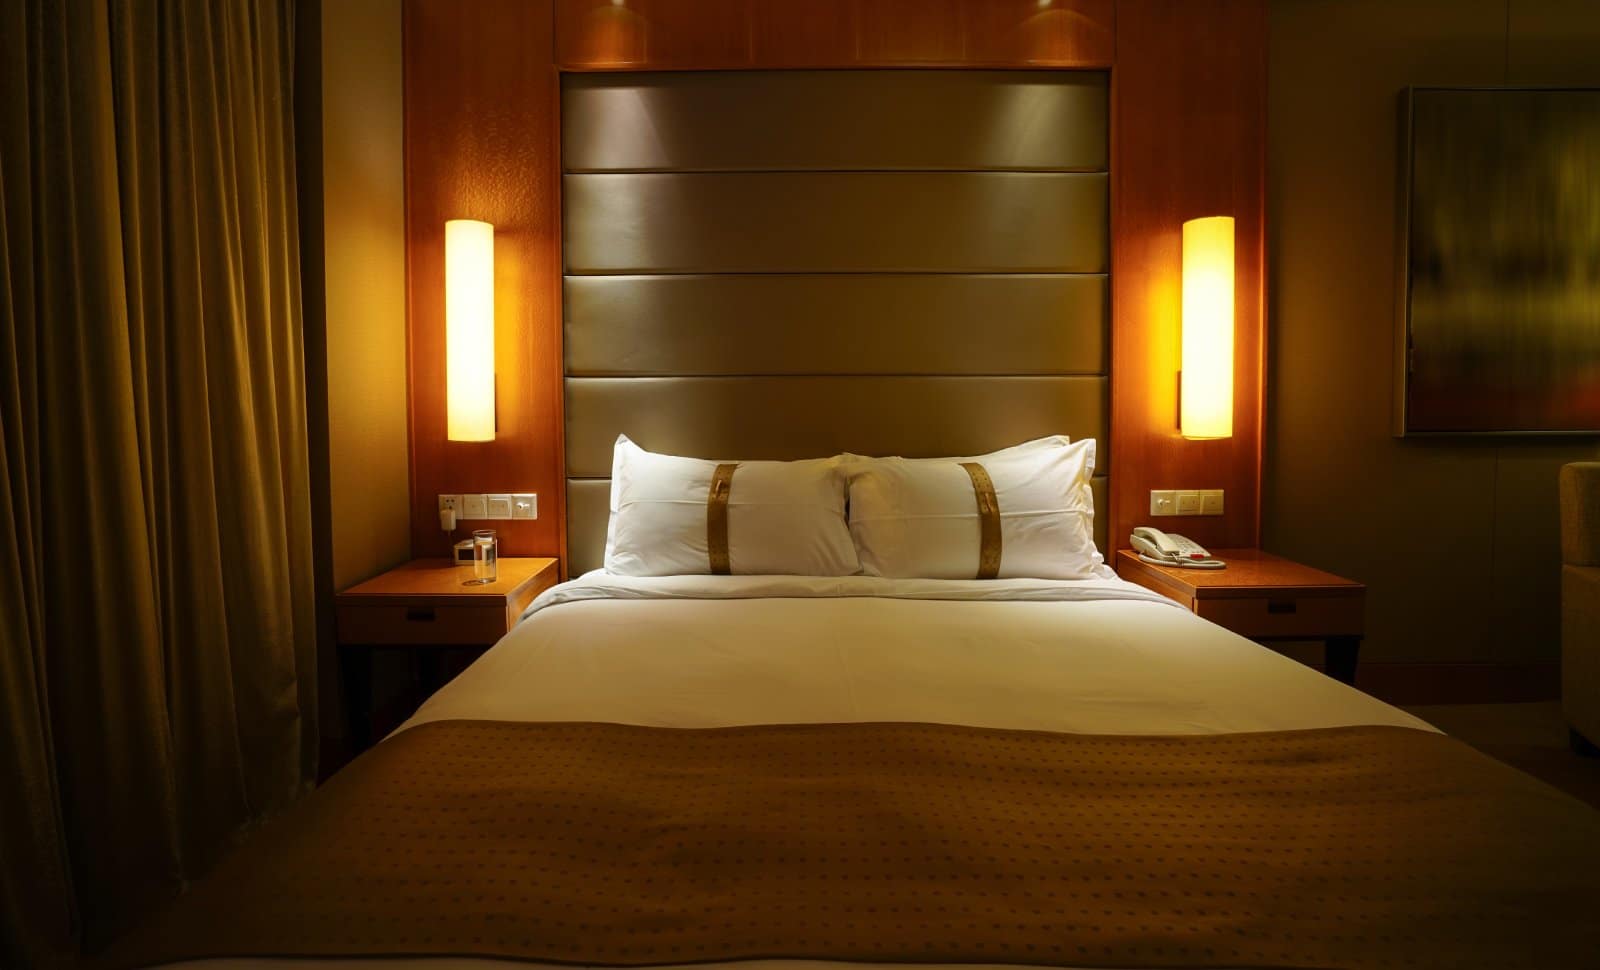 <p class="wp-caption-text">Image Credit: Shutterstock / August_0802</p>  <p><span>The Loden Vancouver is a boutique hotel renowned for its personalized service and elegant accommodations. Located in a quiet area yet close to Vancouver’s bustling downtown, The Loden caters to guests seeking a tranquil retreat within the city. The hotel features well-appointed rooms with contemporary design, offering comfort and luxury to travelers. Amenities include a state-of-the-art fitness center, a spa, and an on-site restaurant known for its innovative cuisine. It’s the ideal choice if you are looking for upscale boutique lodging in Vancouver.</span></p>